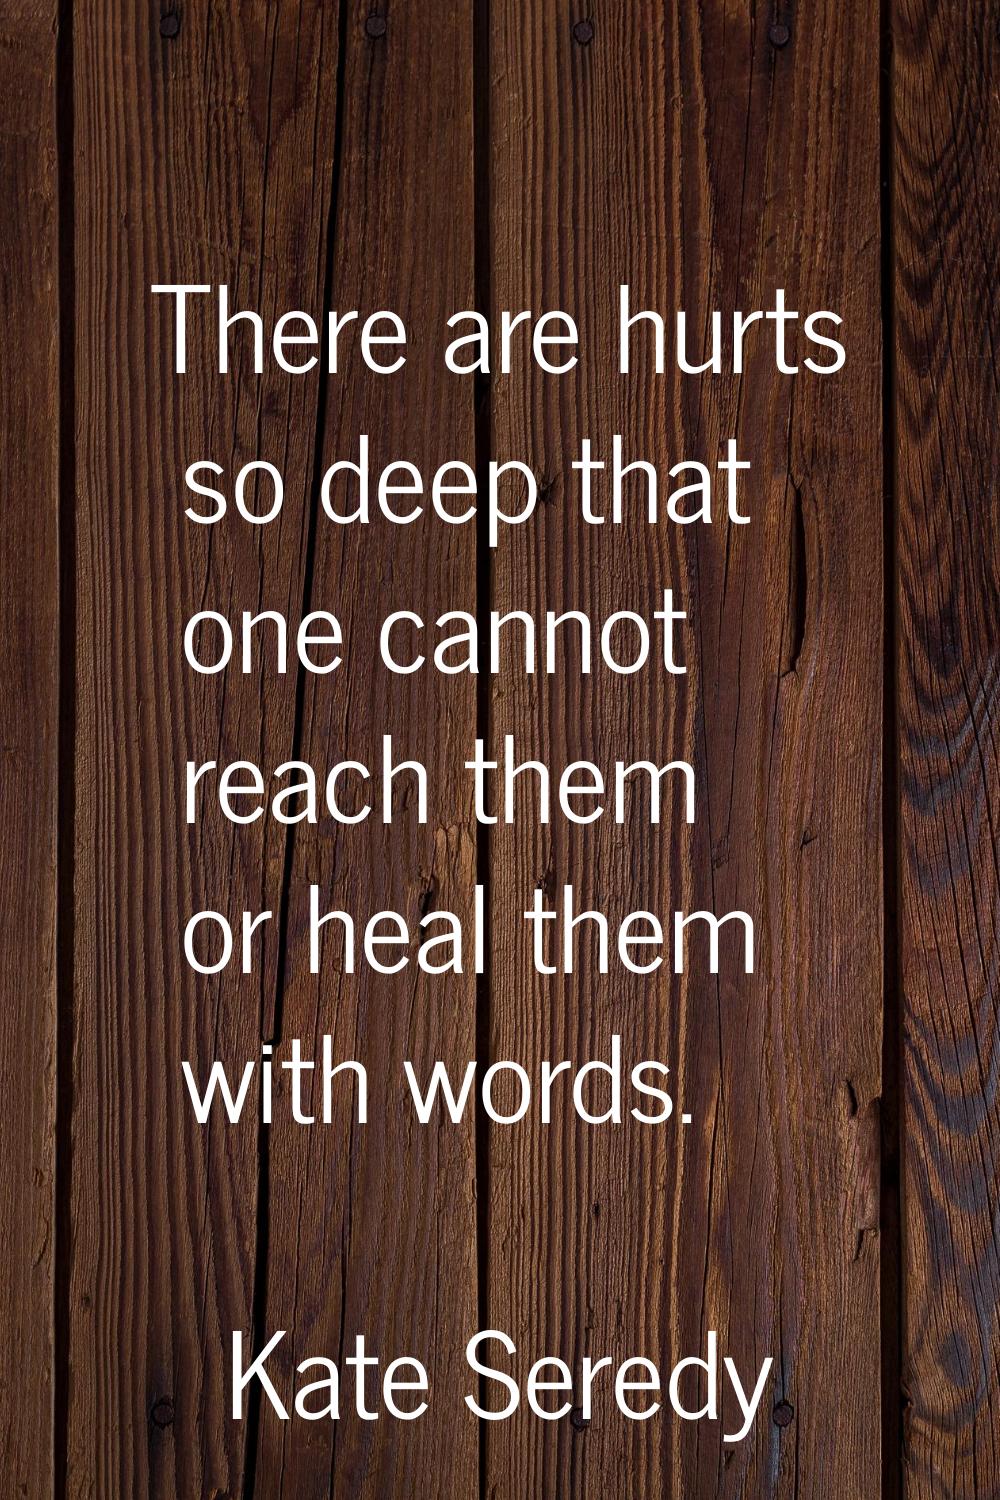 There are hurts so deep that one cannot reach them or heal them with words.